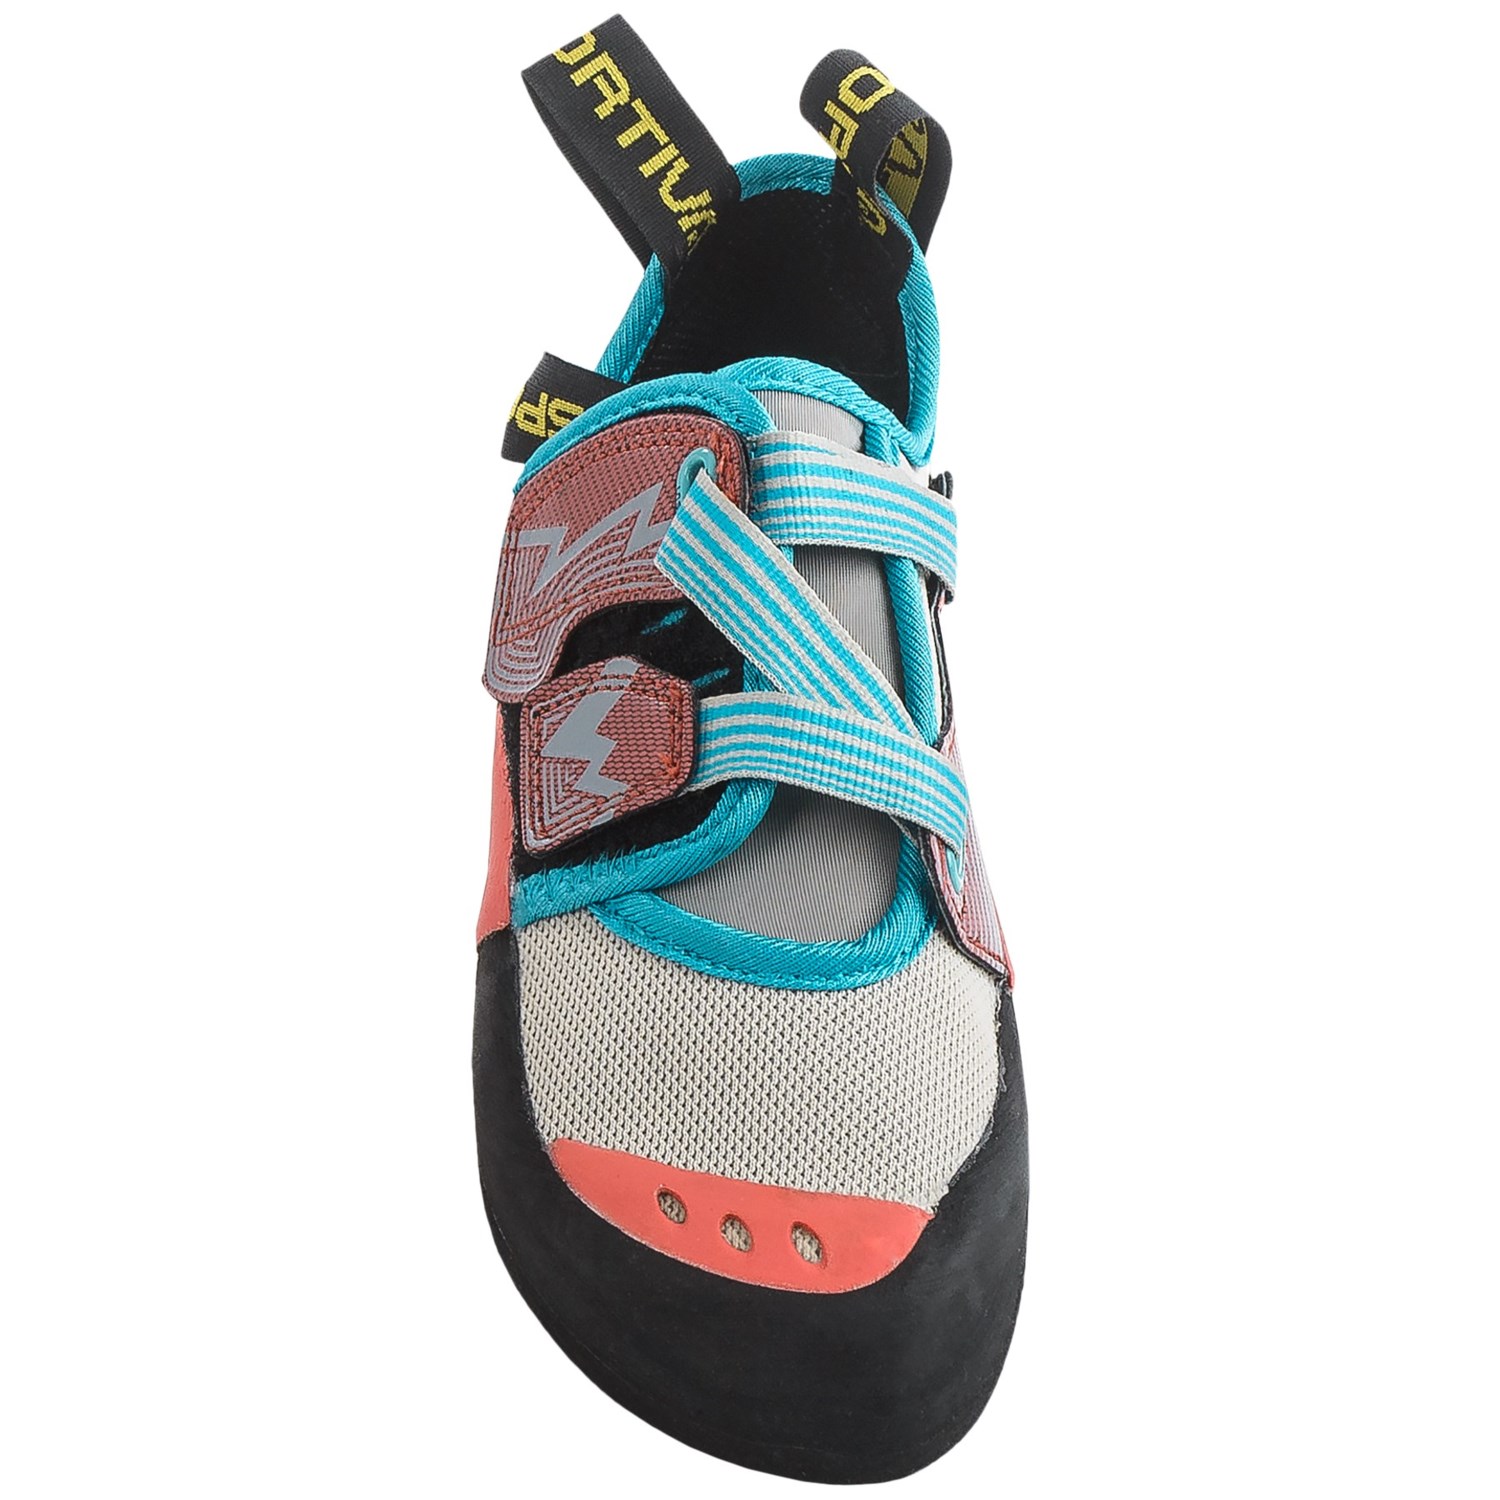 La Sportiva Oxygym Climbing Shoes (For Women) - Save 49%